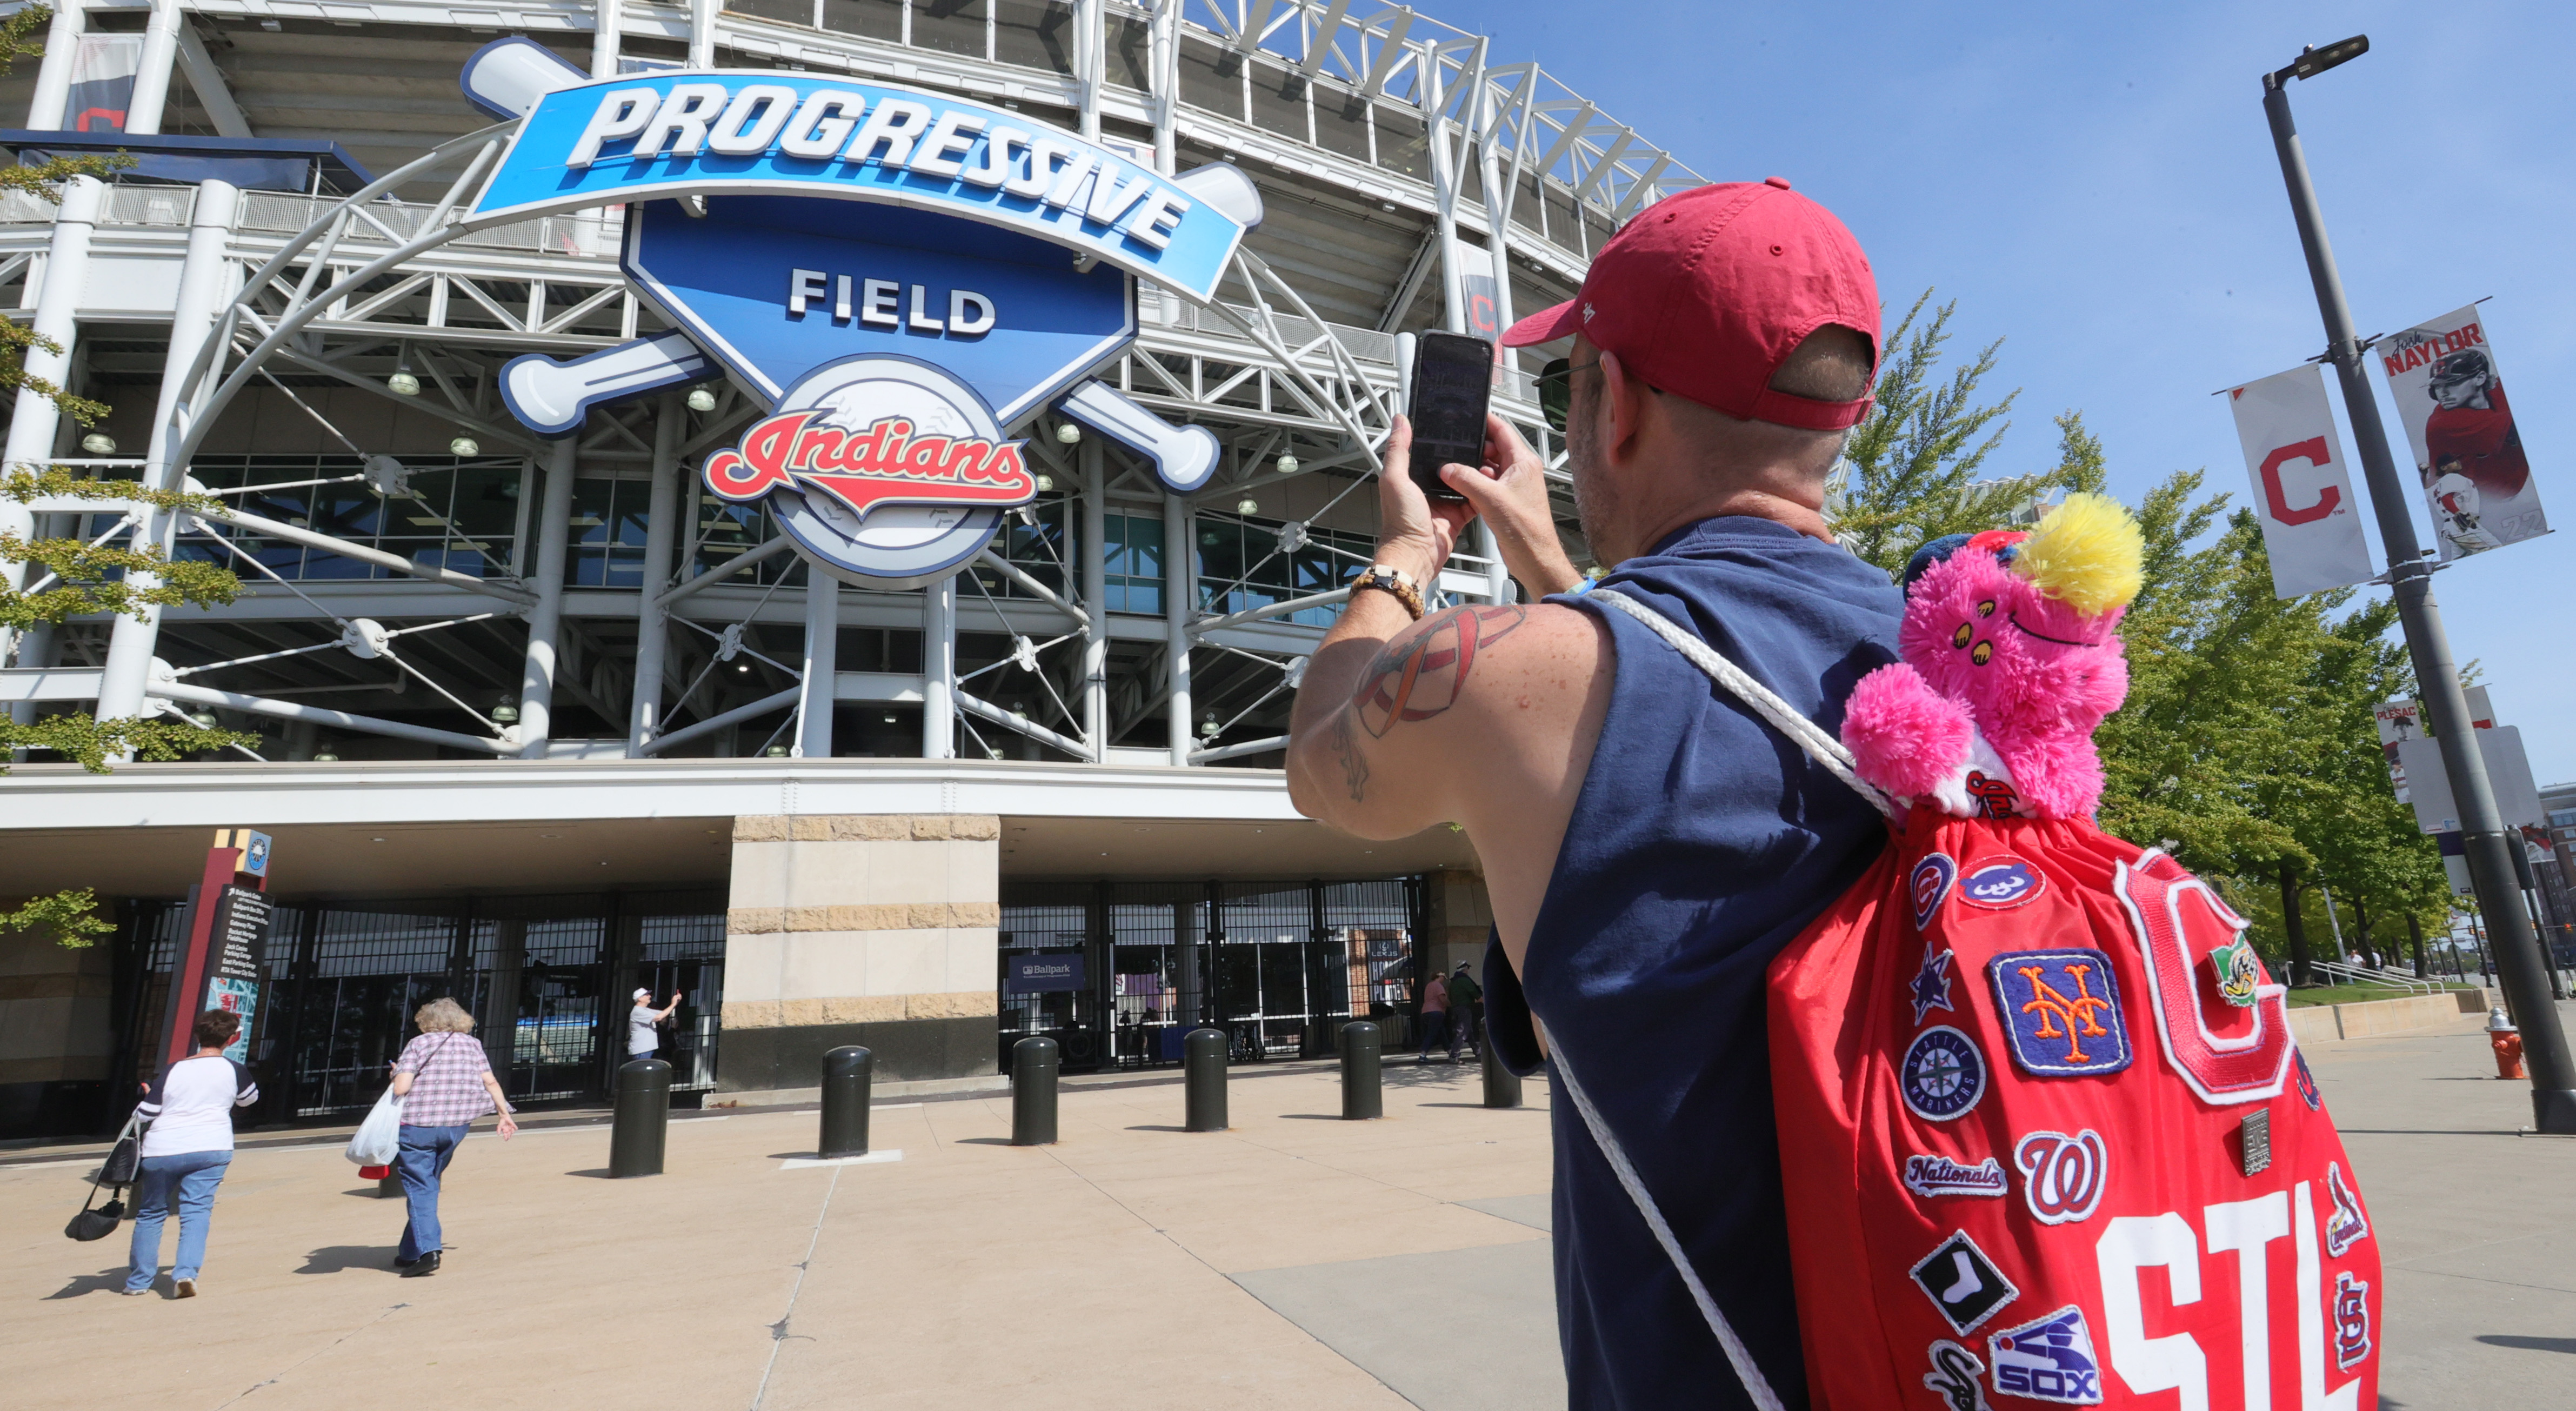 The Cleveland Indians Finally Say Goodbye to Chief Wahoo (Sort Of